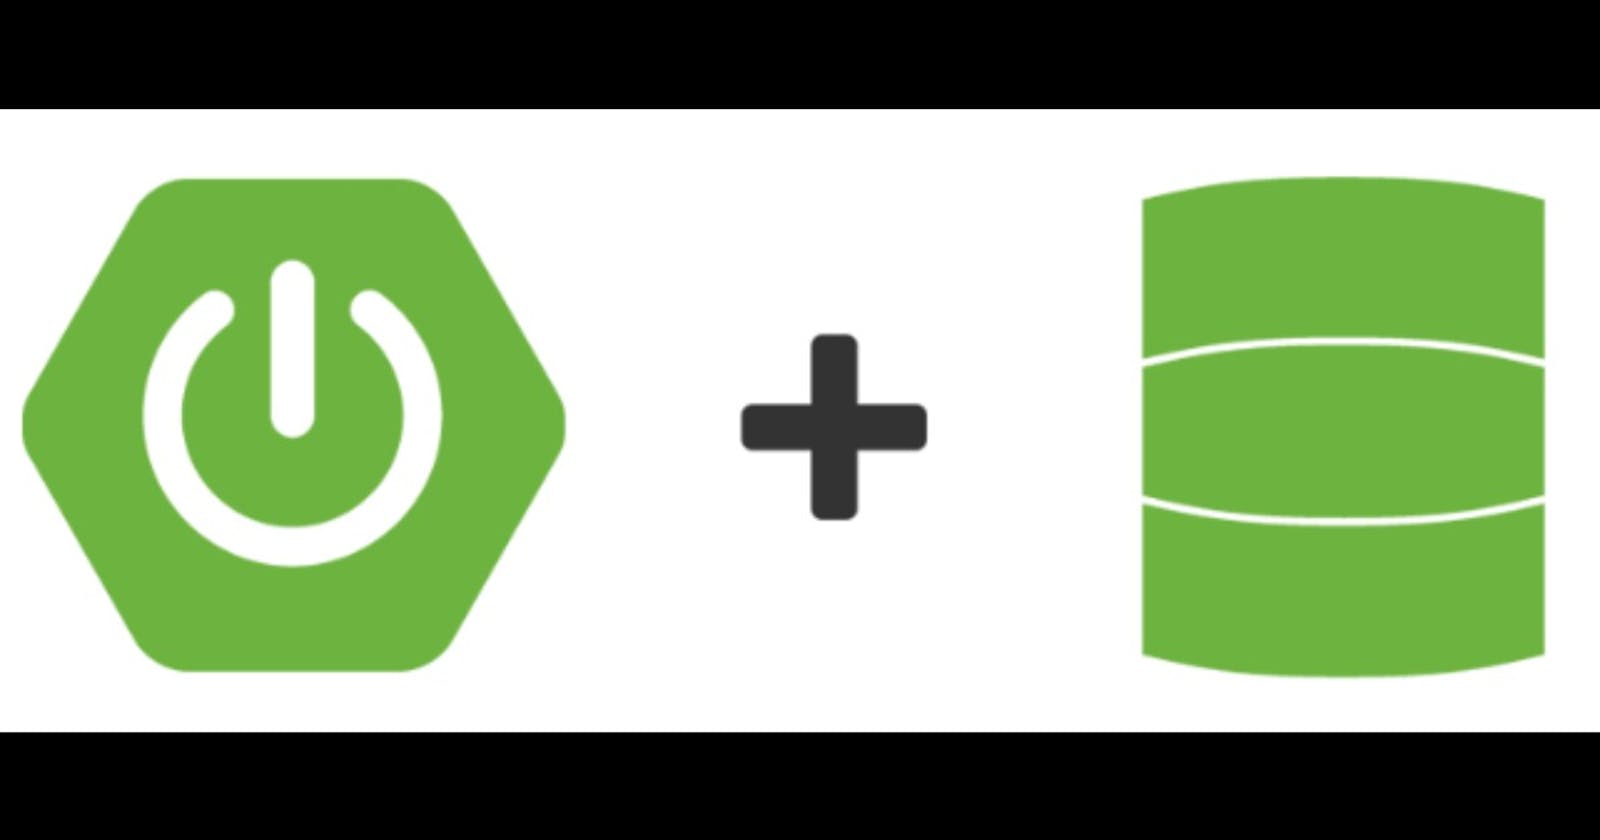 Spring Boot and H2 Database Integration